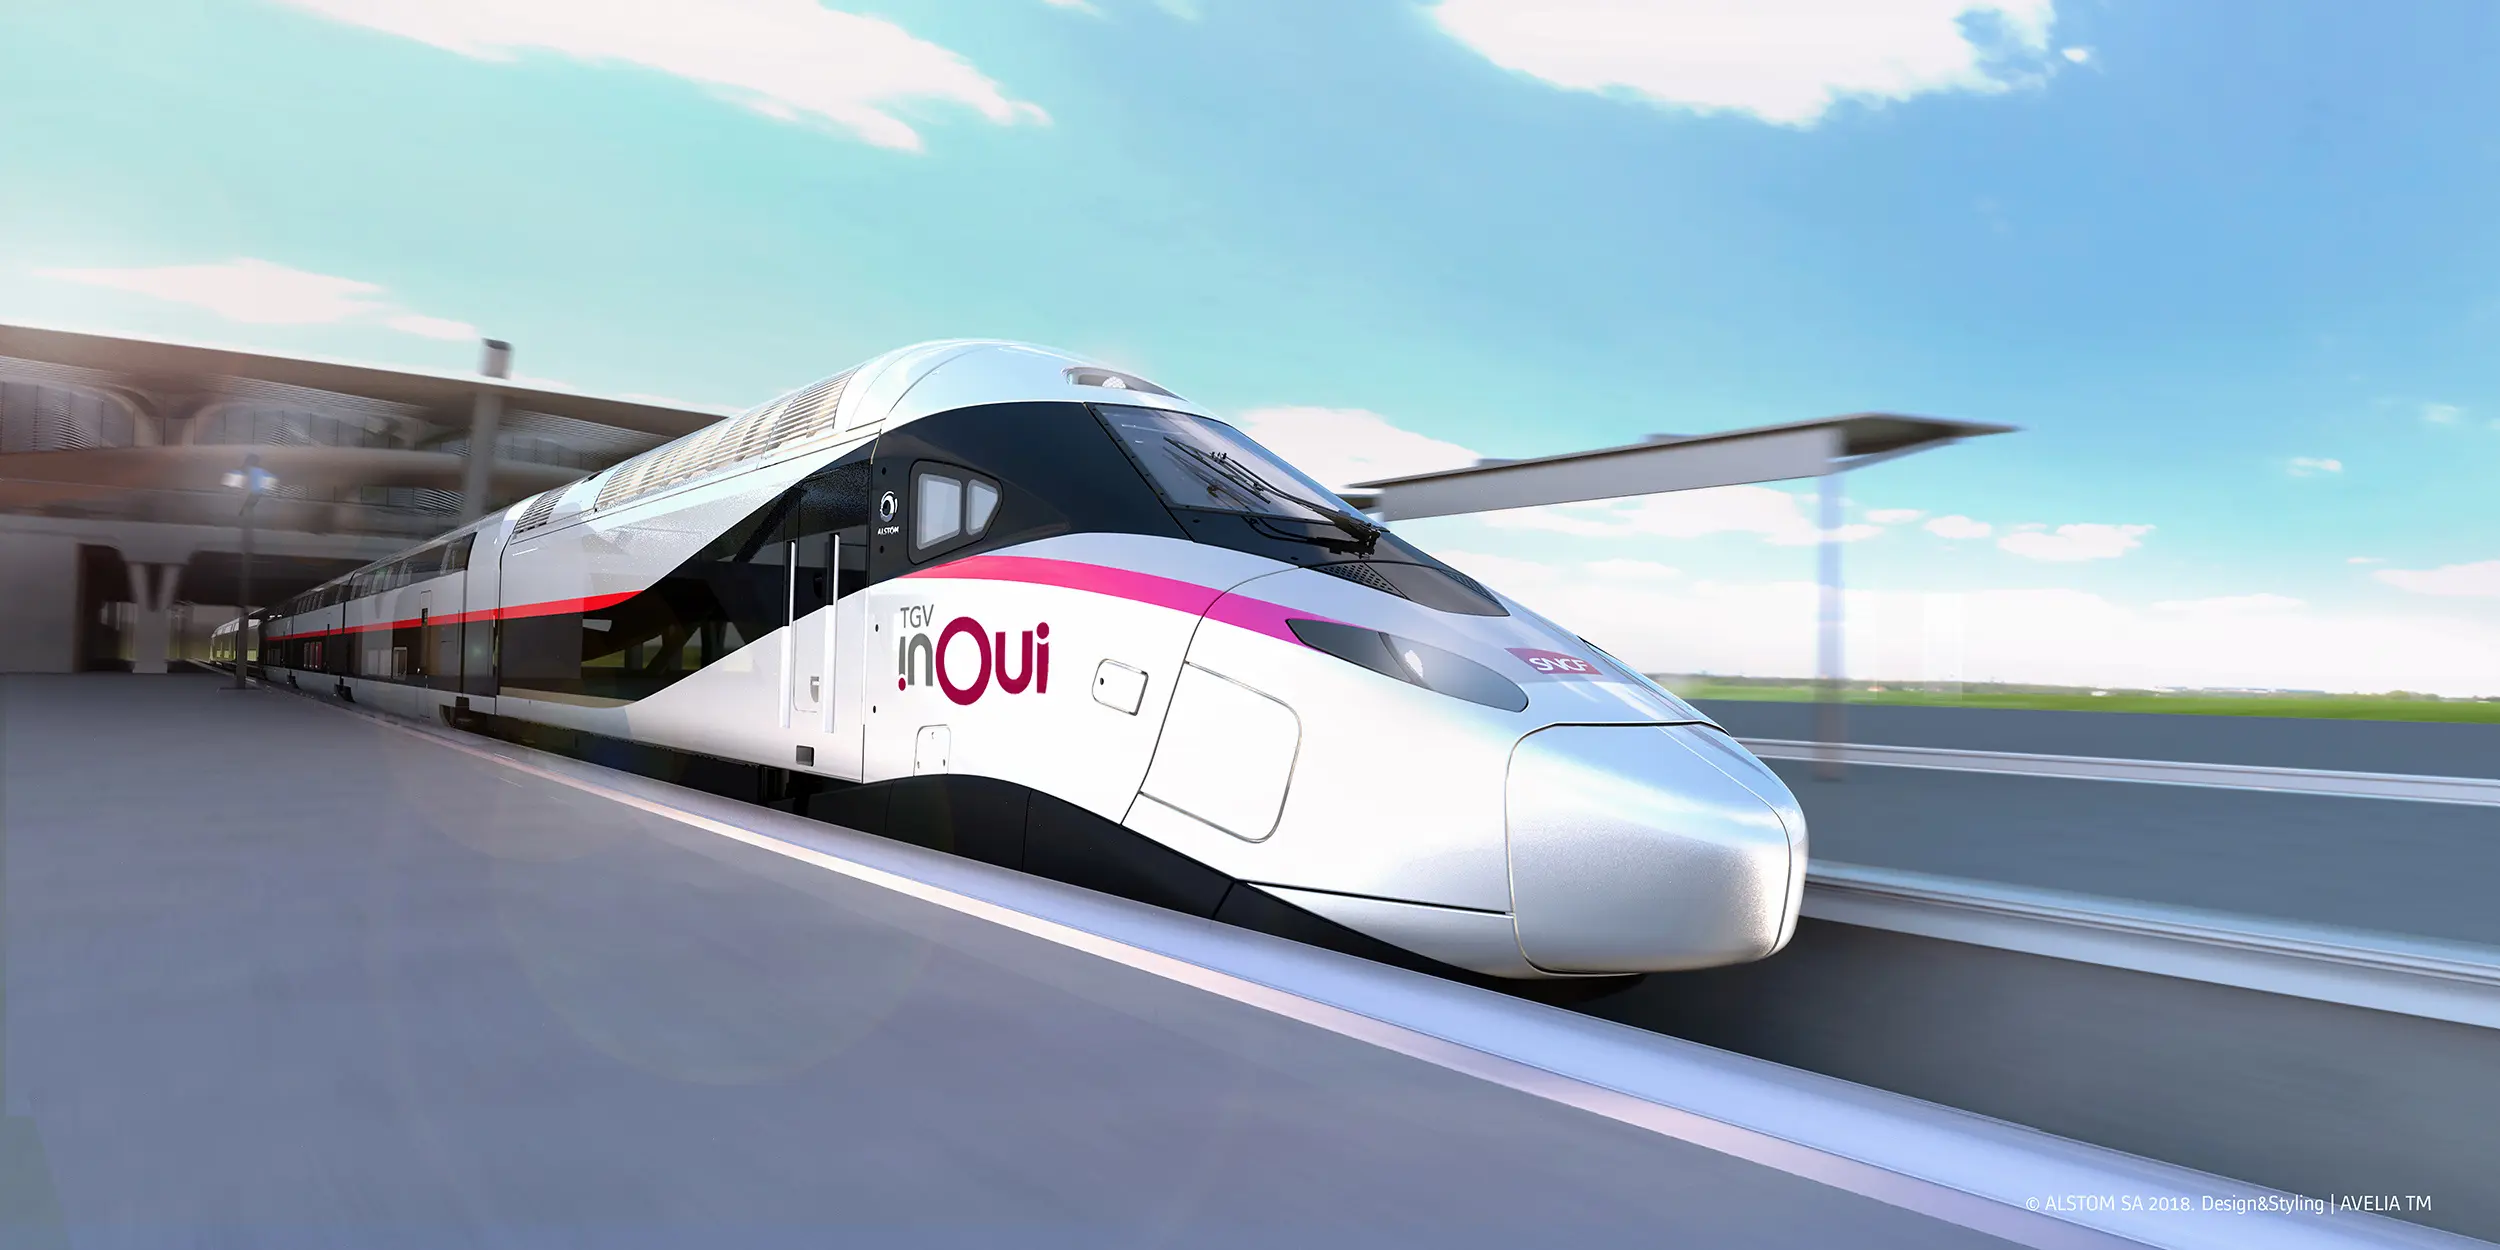 Alstom receives an SNCF order for 100 next-generation very high speed trains